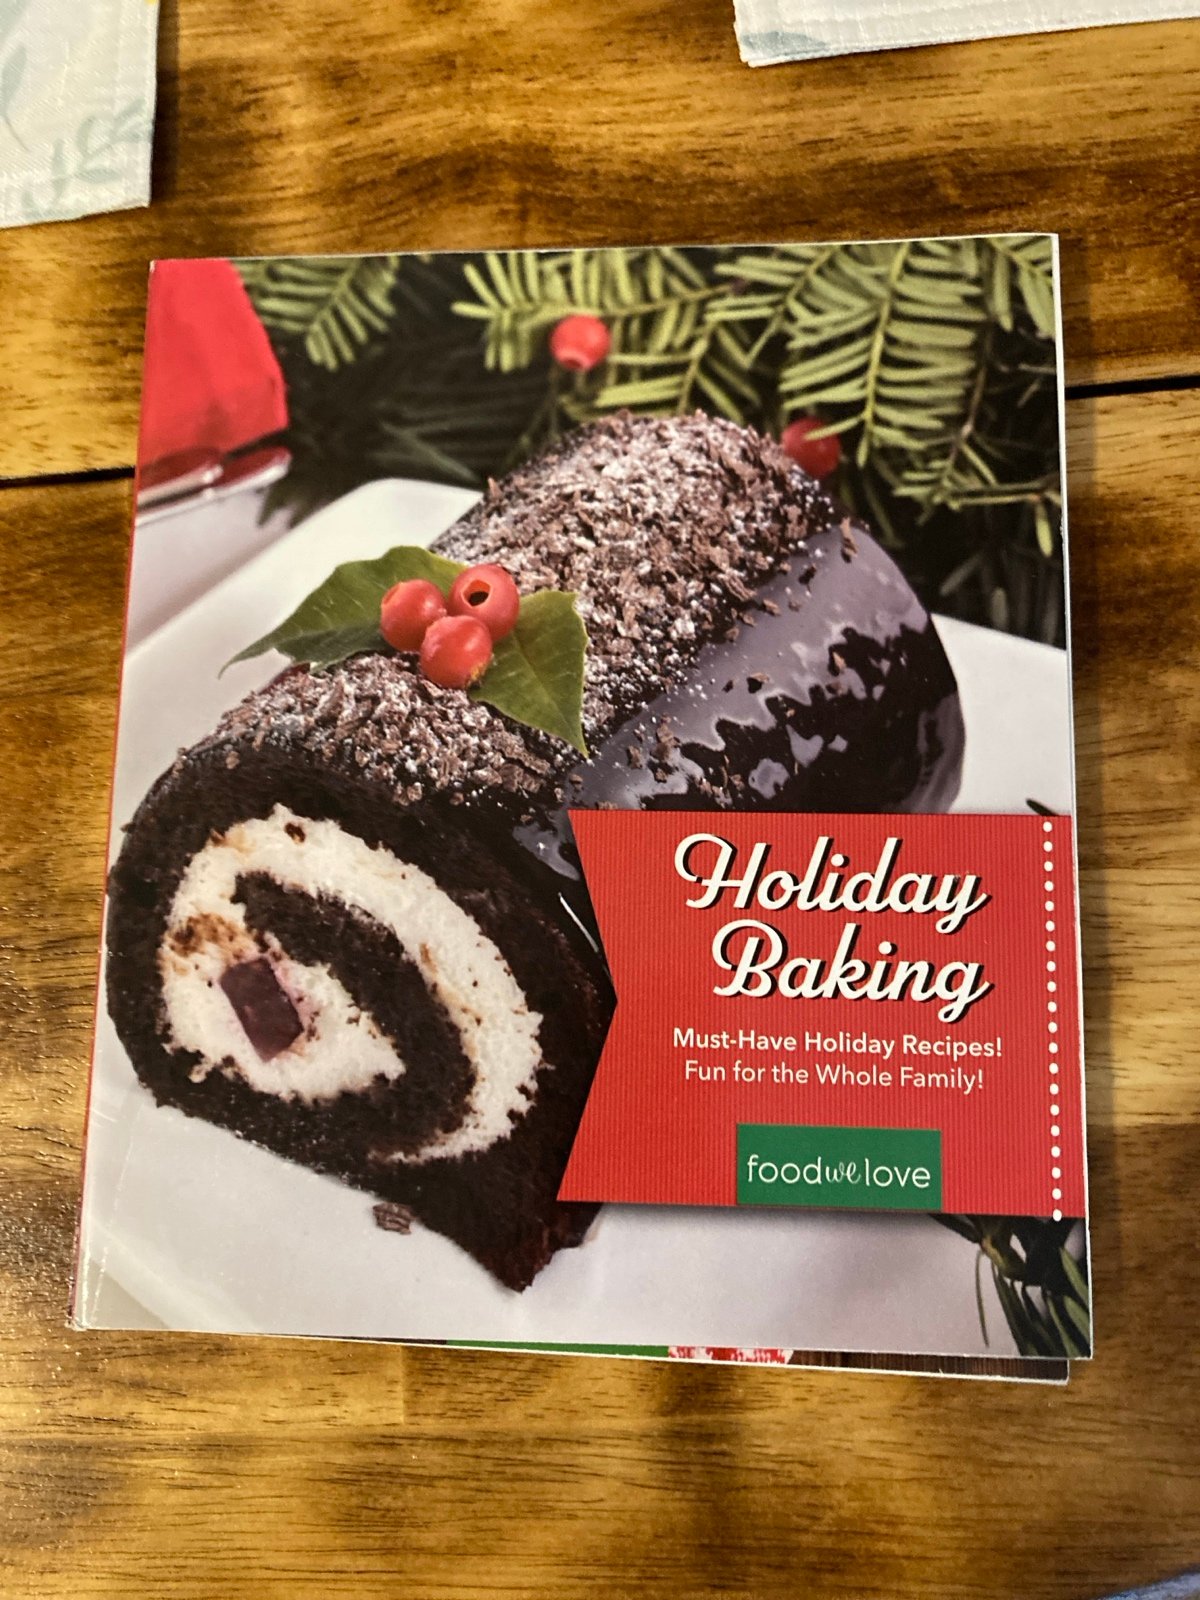 Holiday Baking cookbook Must have holiday recipes BZ79fQ0c6